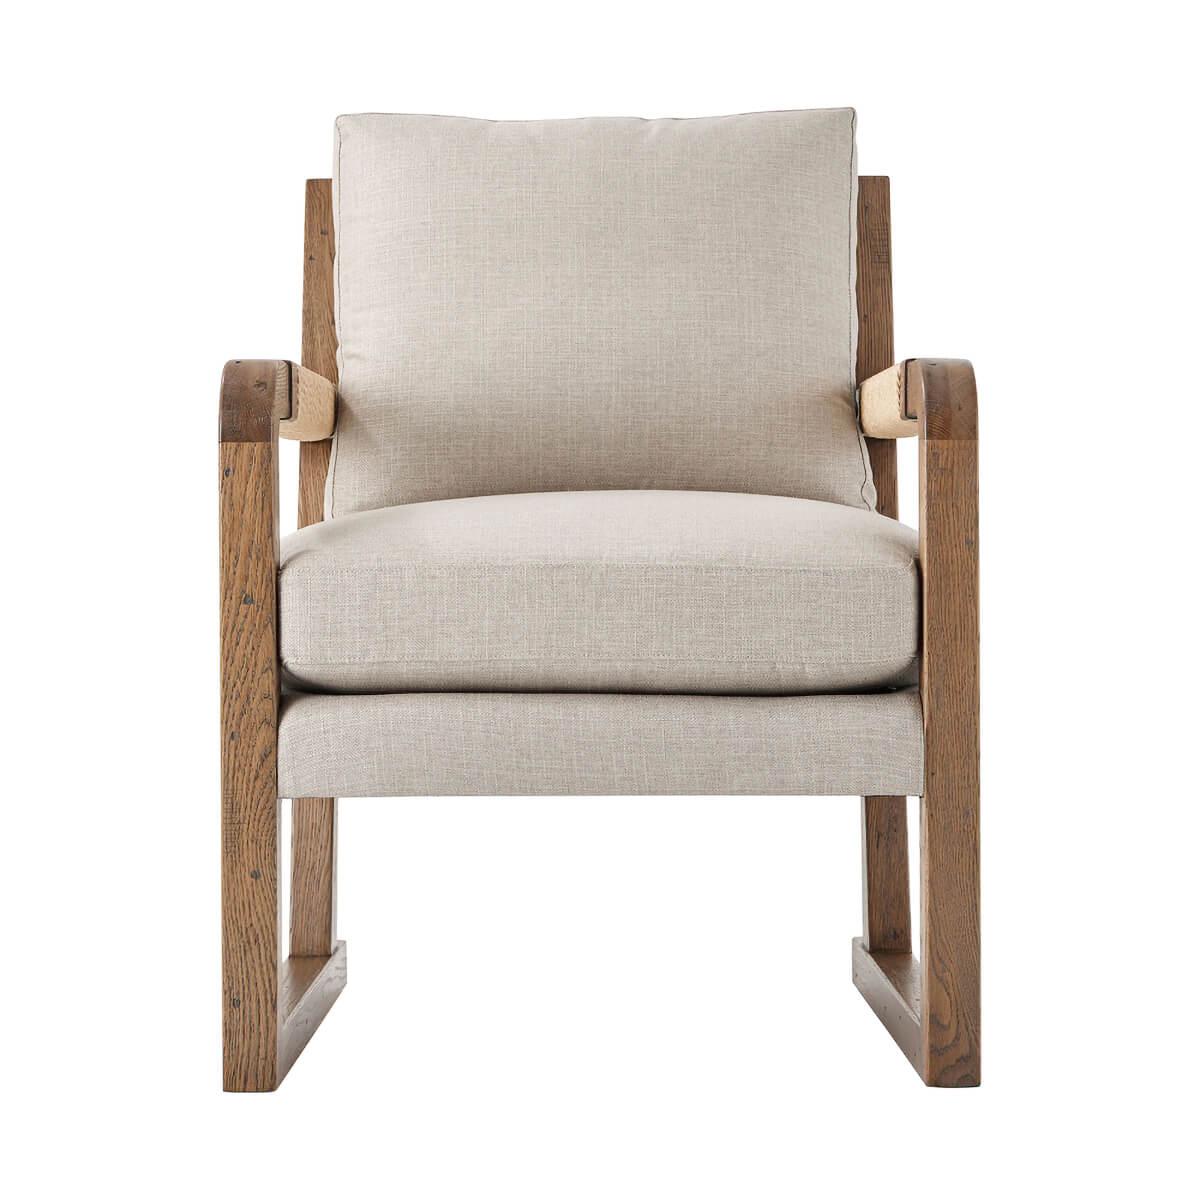 A rustic organic modern style armchair in our light oak finish, with handwoven faux rush paneled back with loose cushion backrest and seat, the open arms with faux rush wrapped details. The cushions are in a performance fabric.

Dimensions: 27